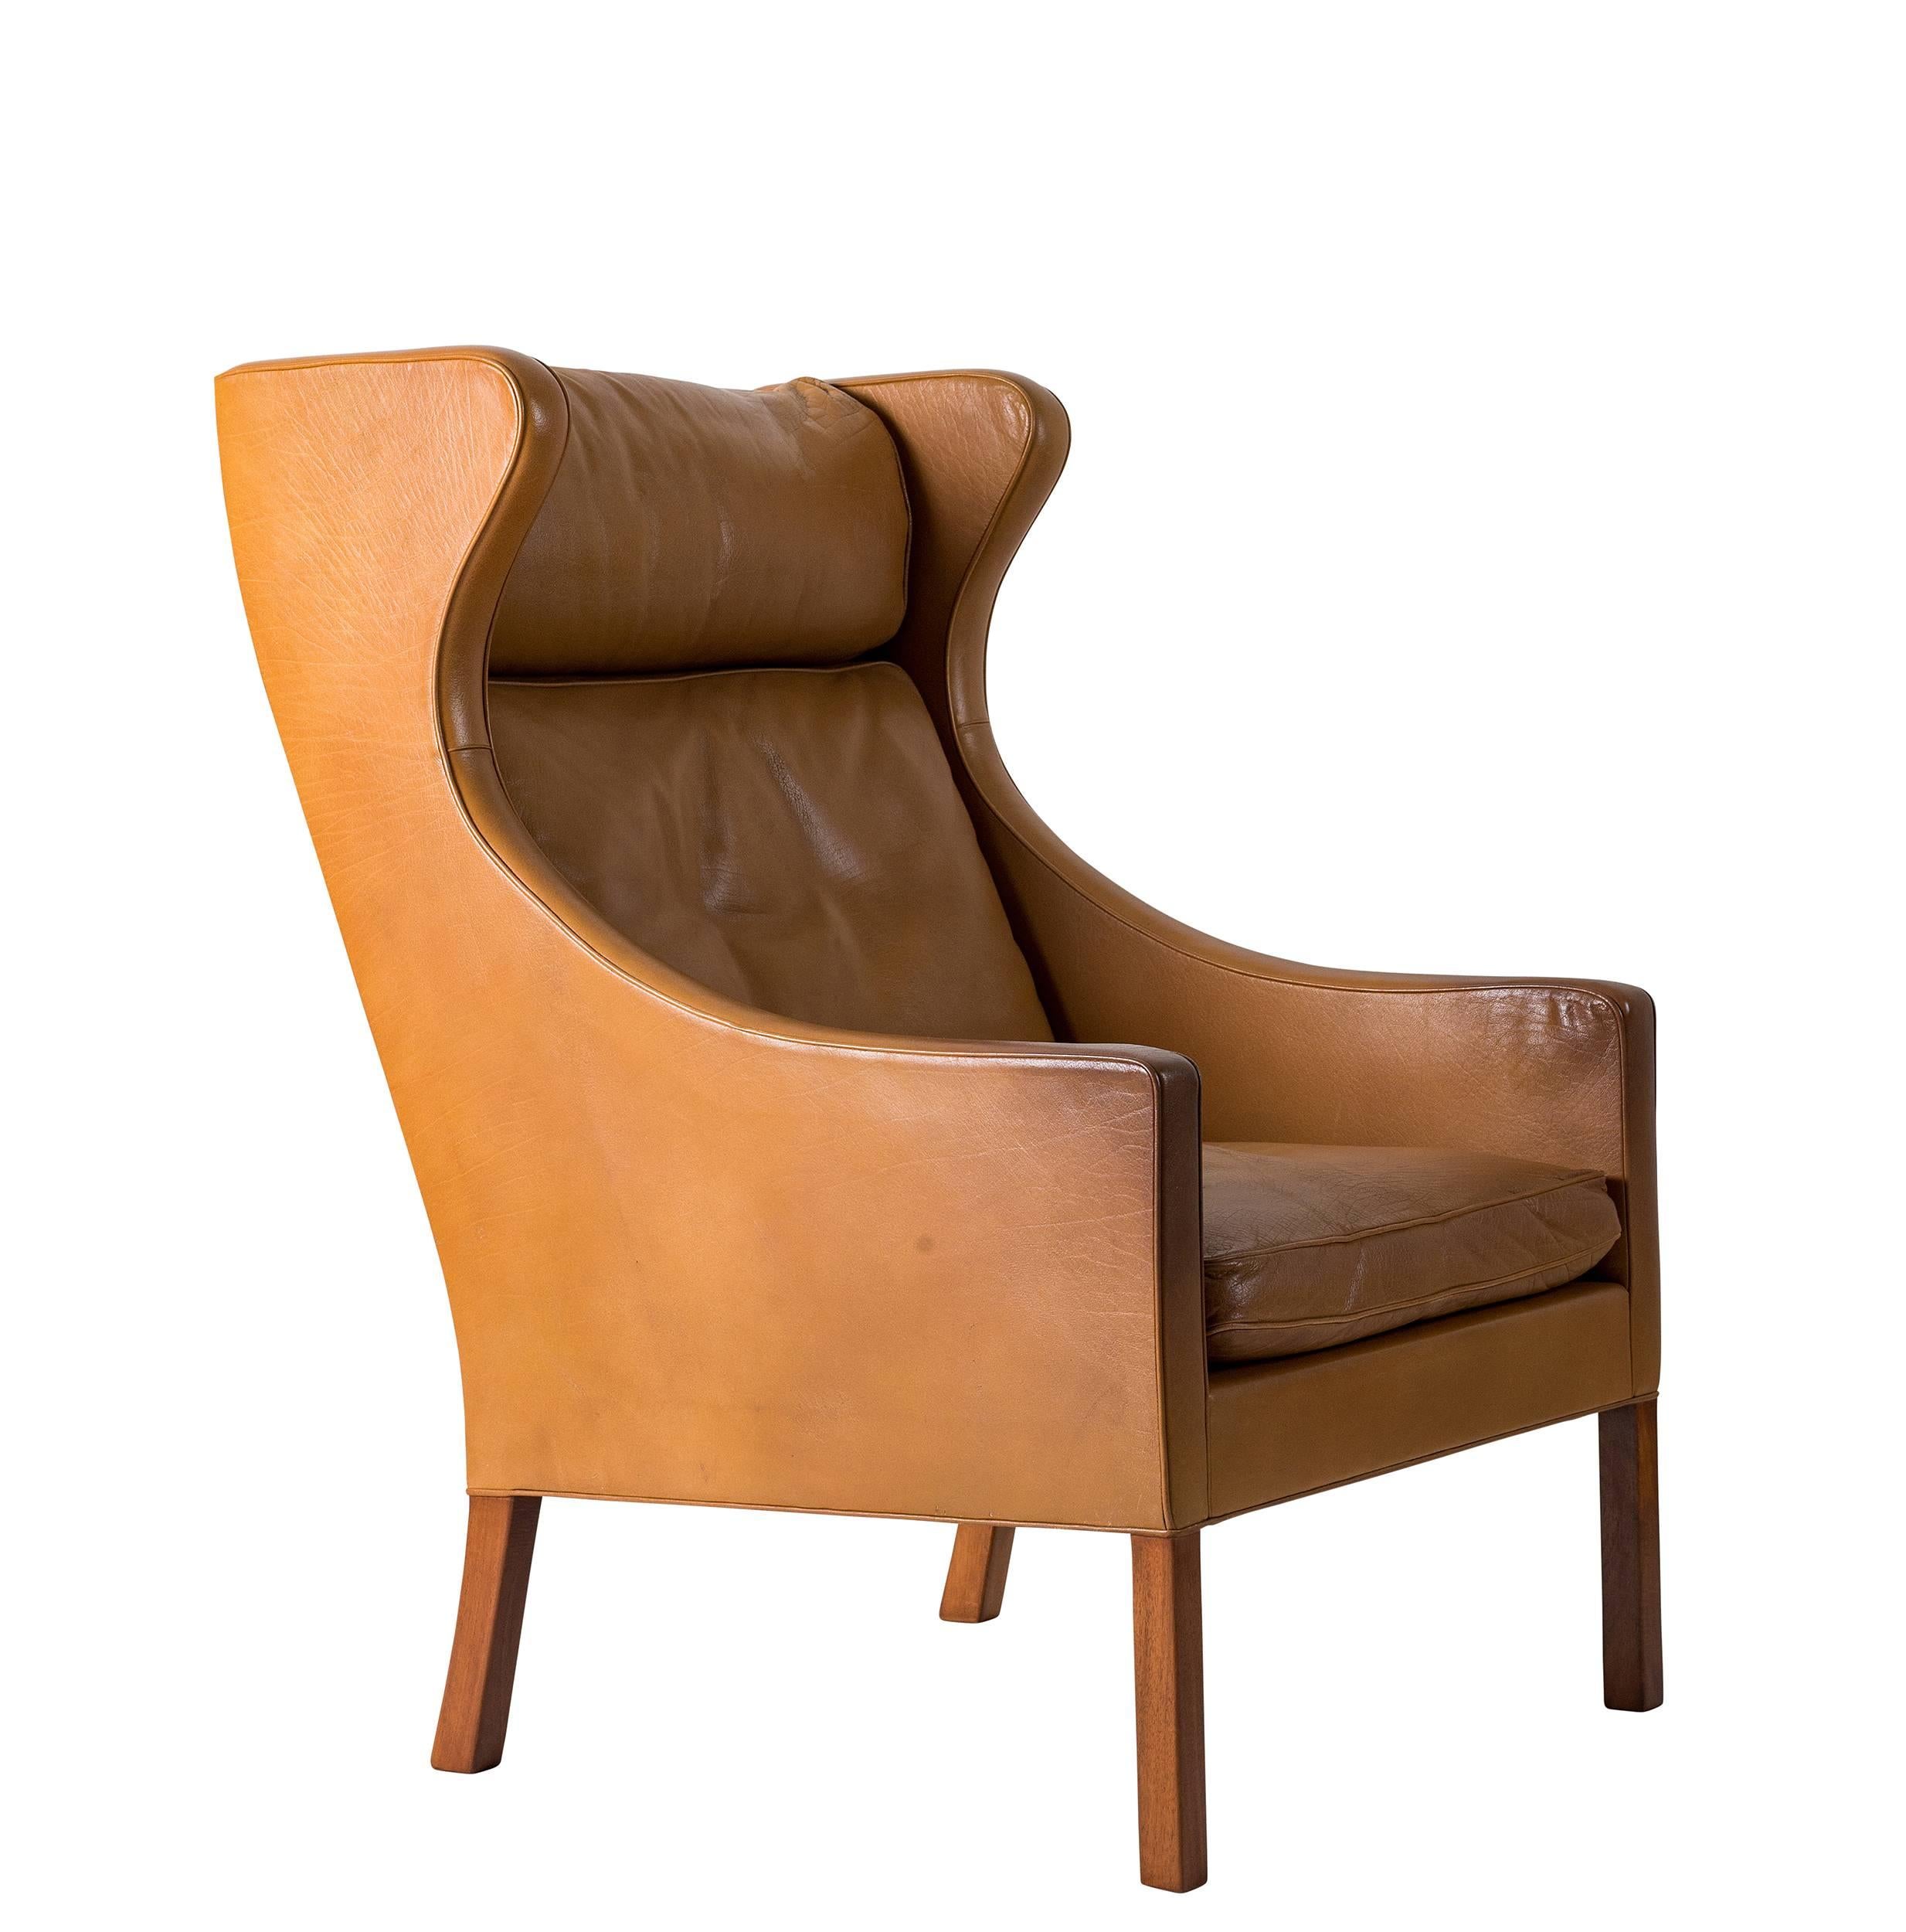 Børge Mogensen leather wingback chair designed in 1963 and produced by Fredericia.